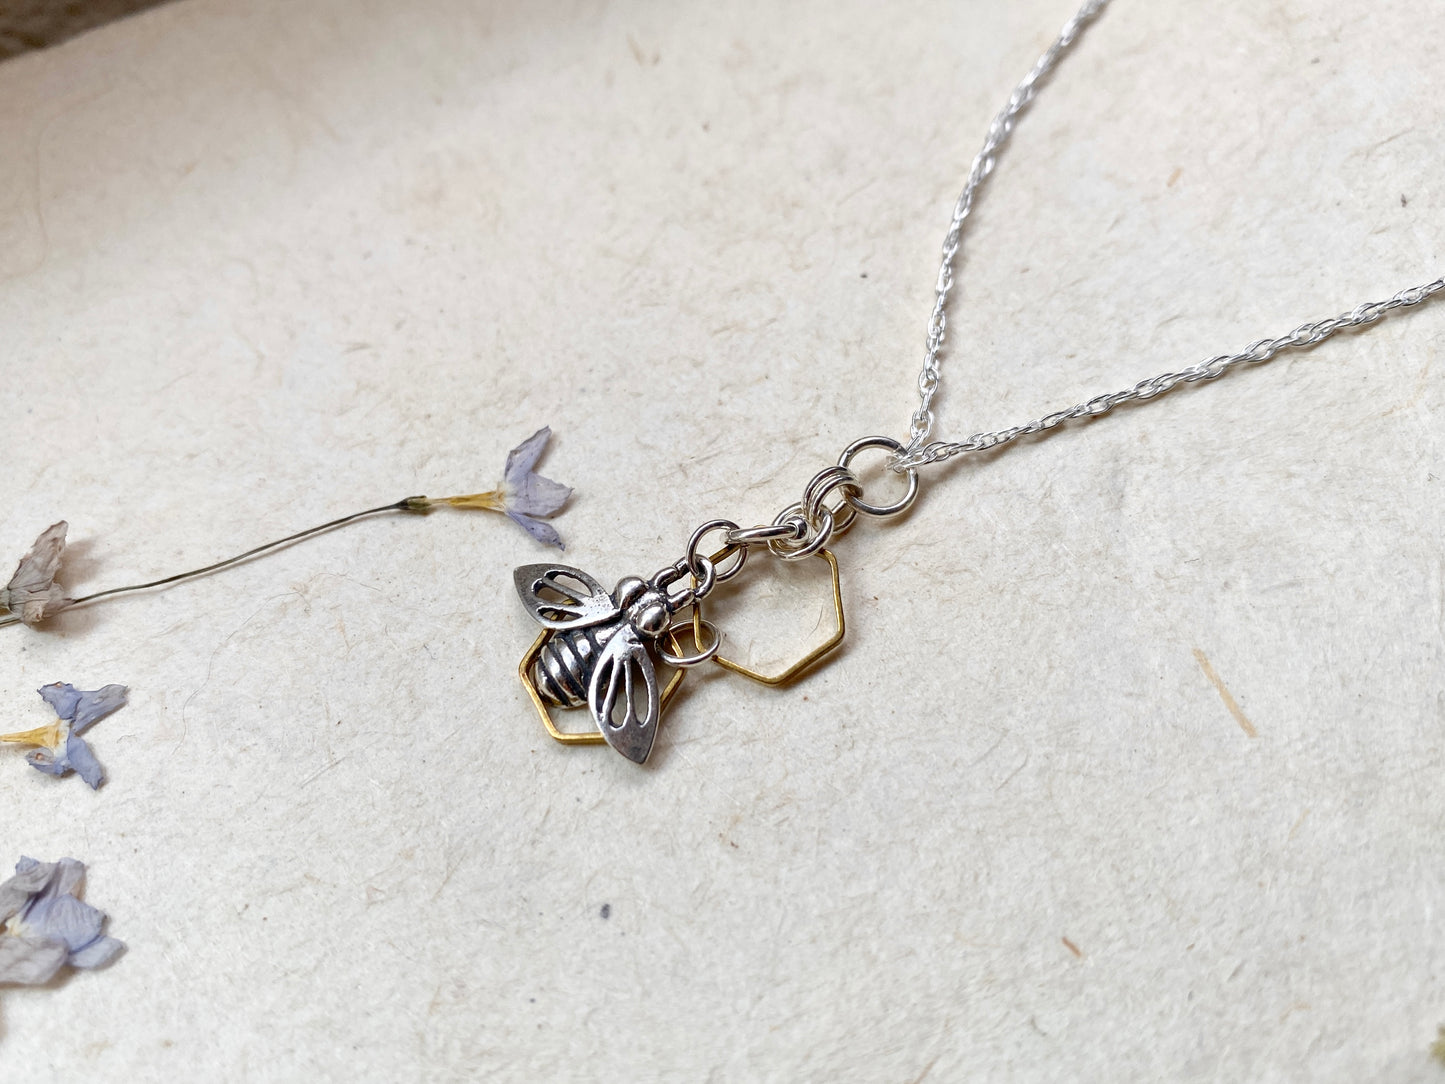 Busy Bee Earrings ~ Sterling Silver and Brass Bee and Honeycomb Charm Earrings